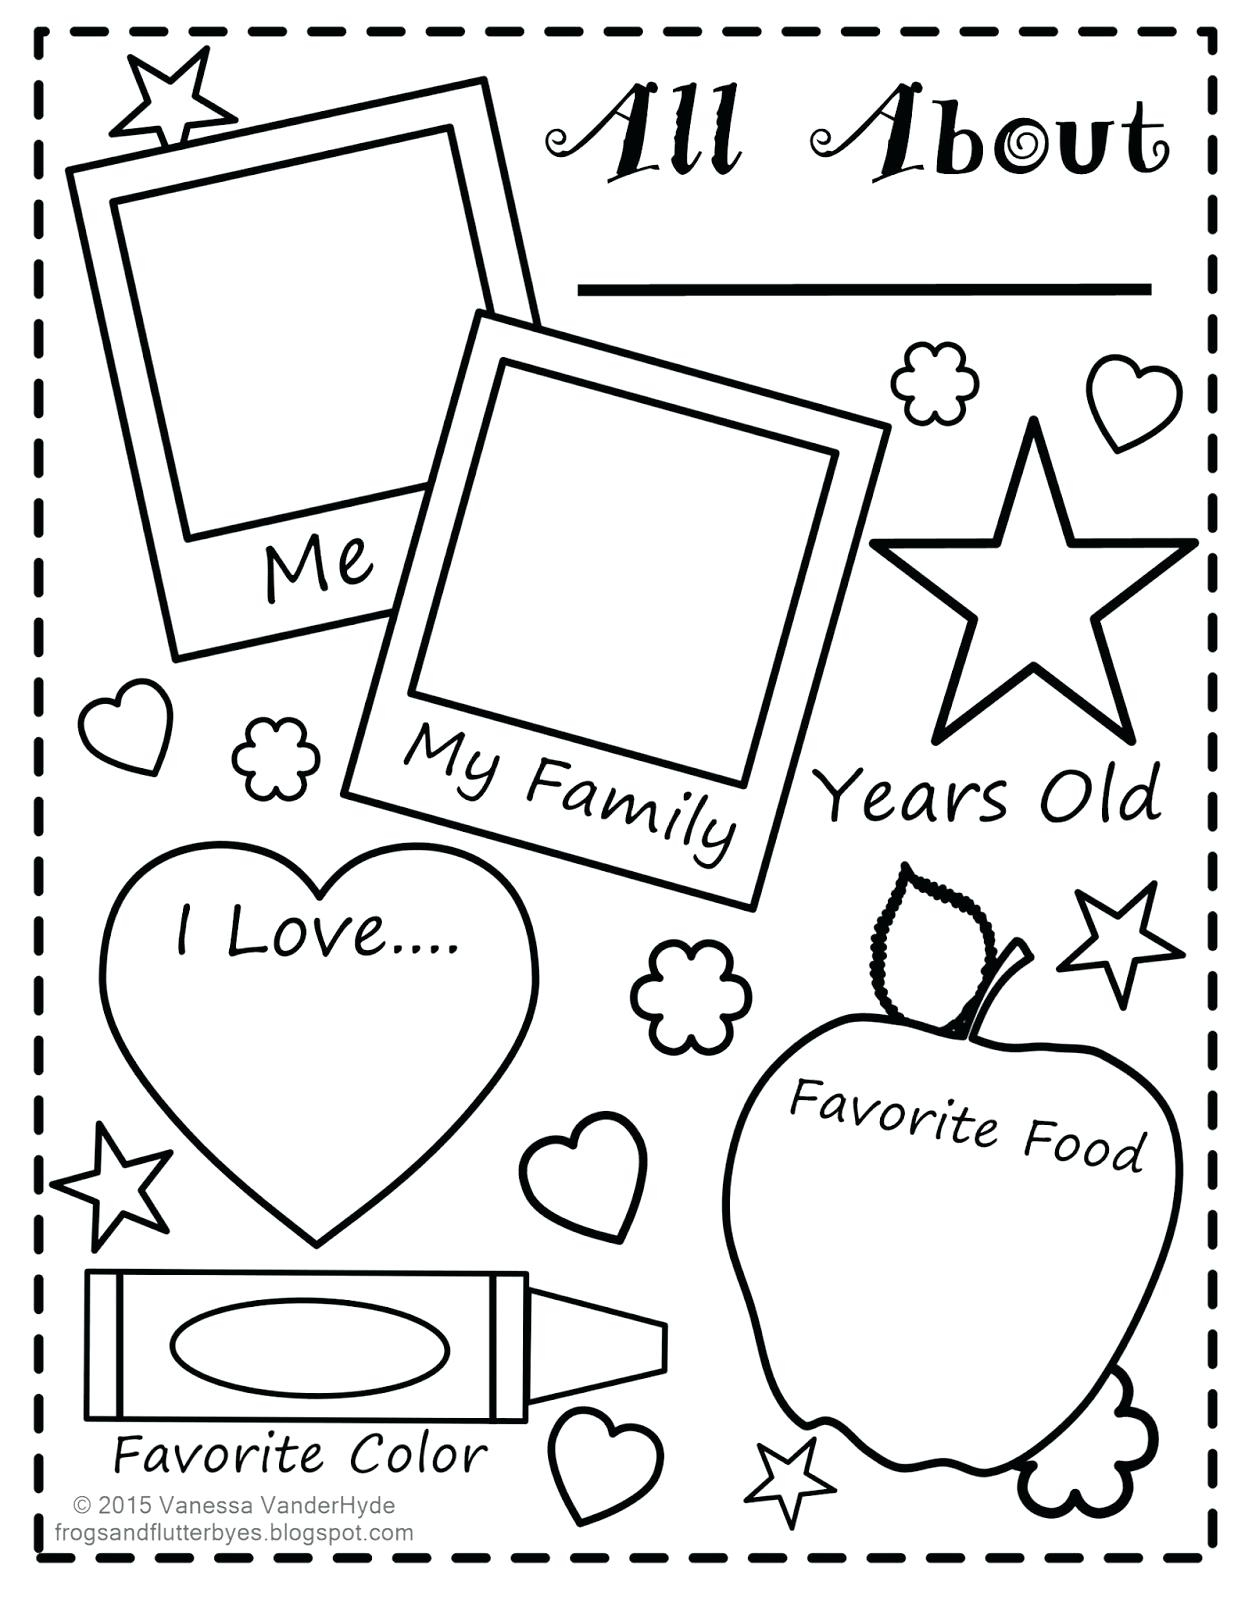 Free Printable All About Me Worksheet Collection Of Free Printable - Free Printable All About Me Worksheet